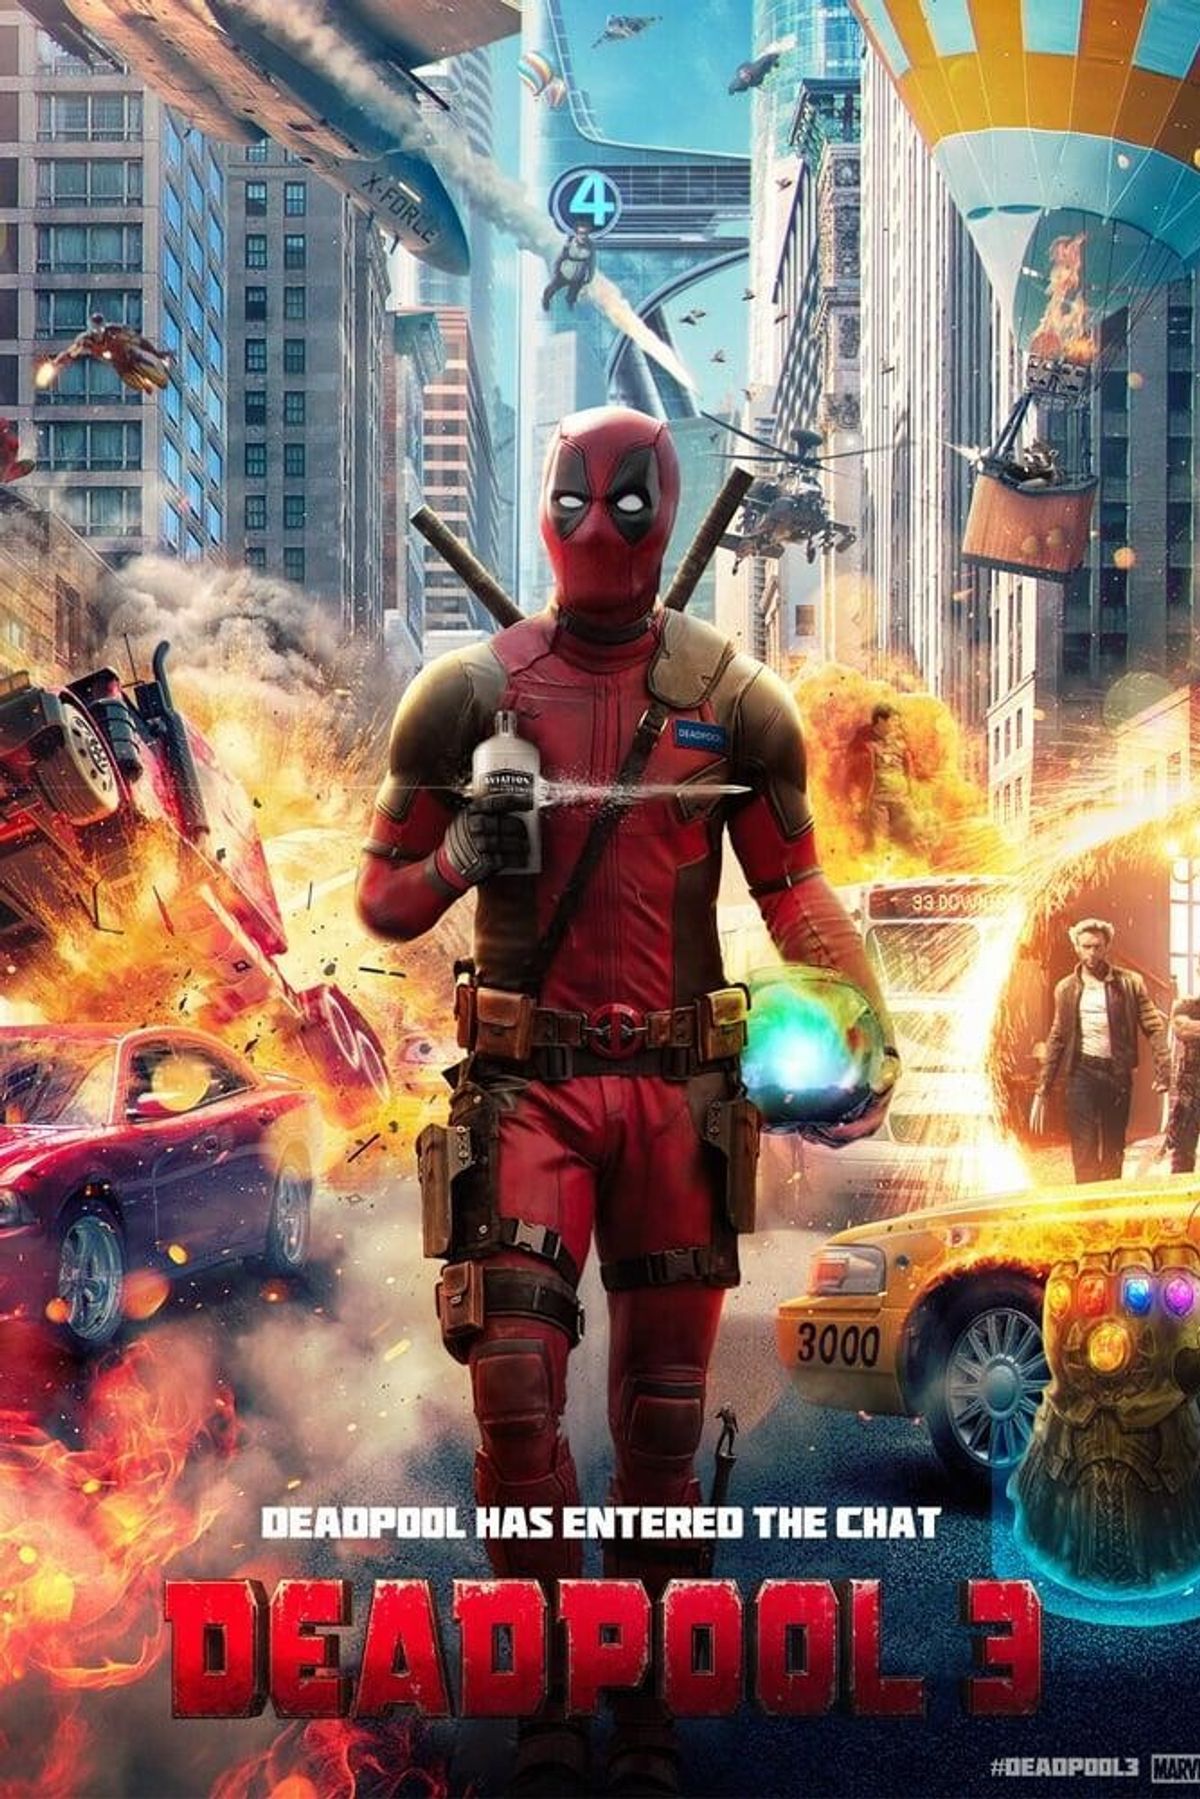 arion smith recommends deadpool online movie free pic